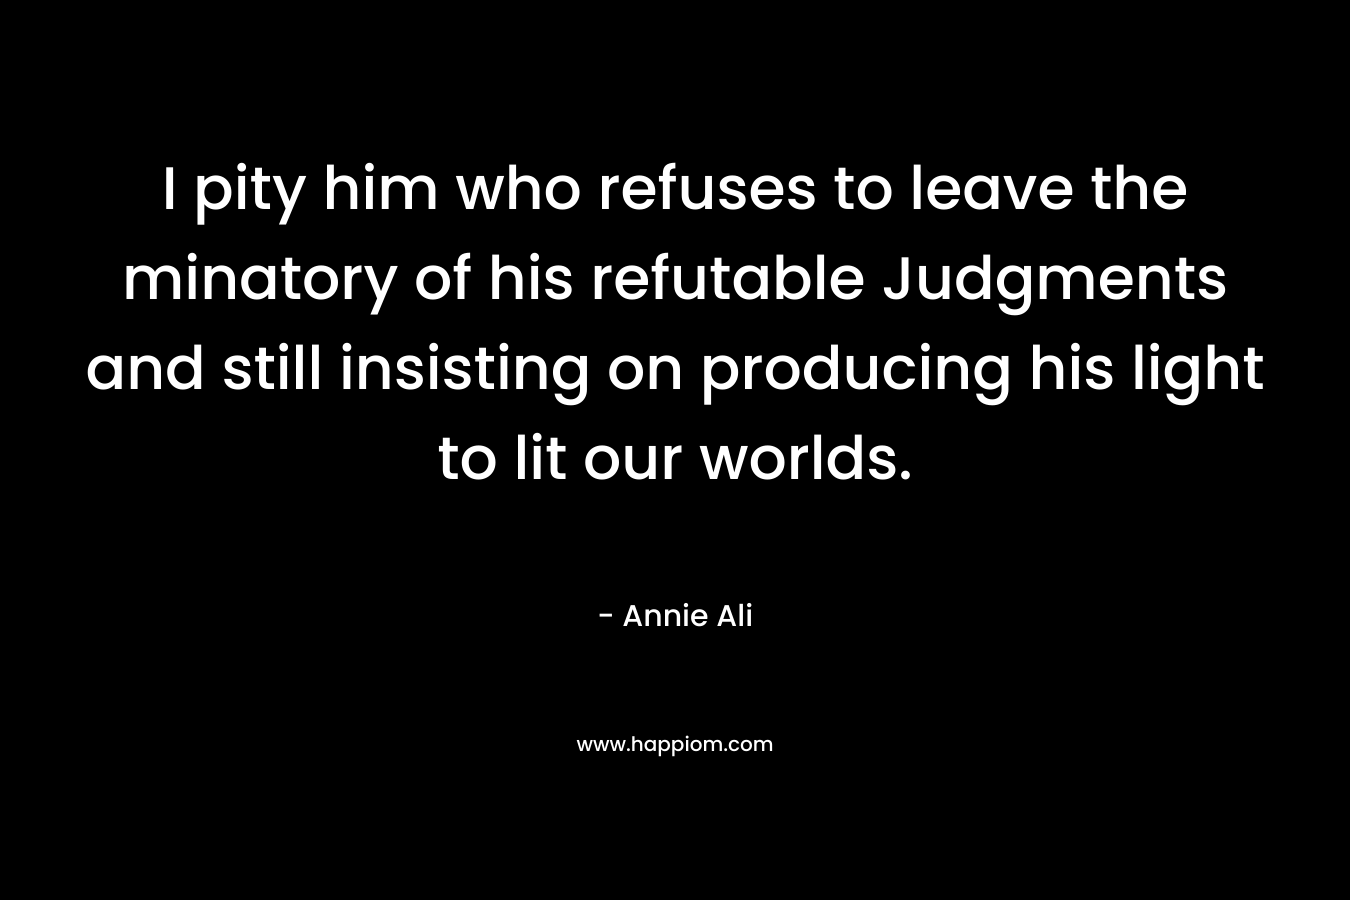 I pity him who refuses to leave the minatory of his refutable Judgments and still insisting on producing his light to lit our worlds. – Annie Ali